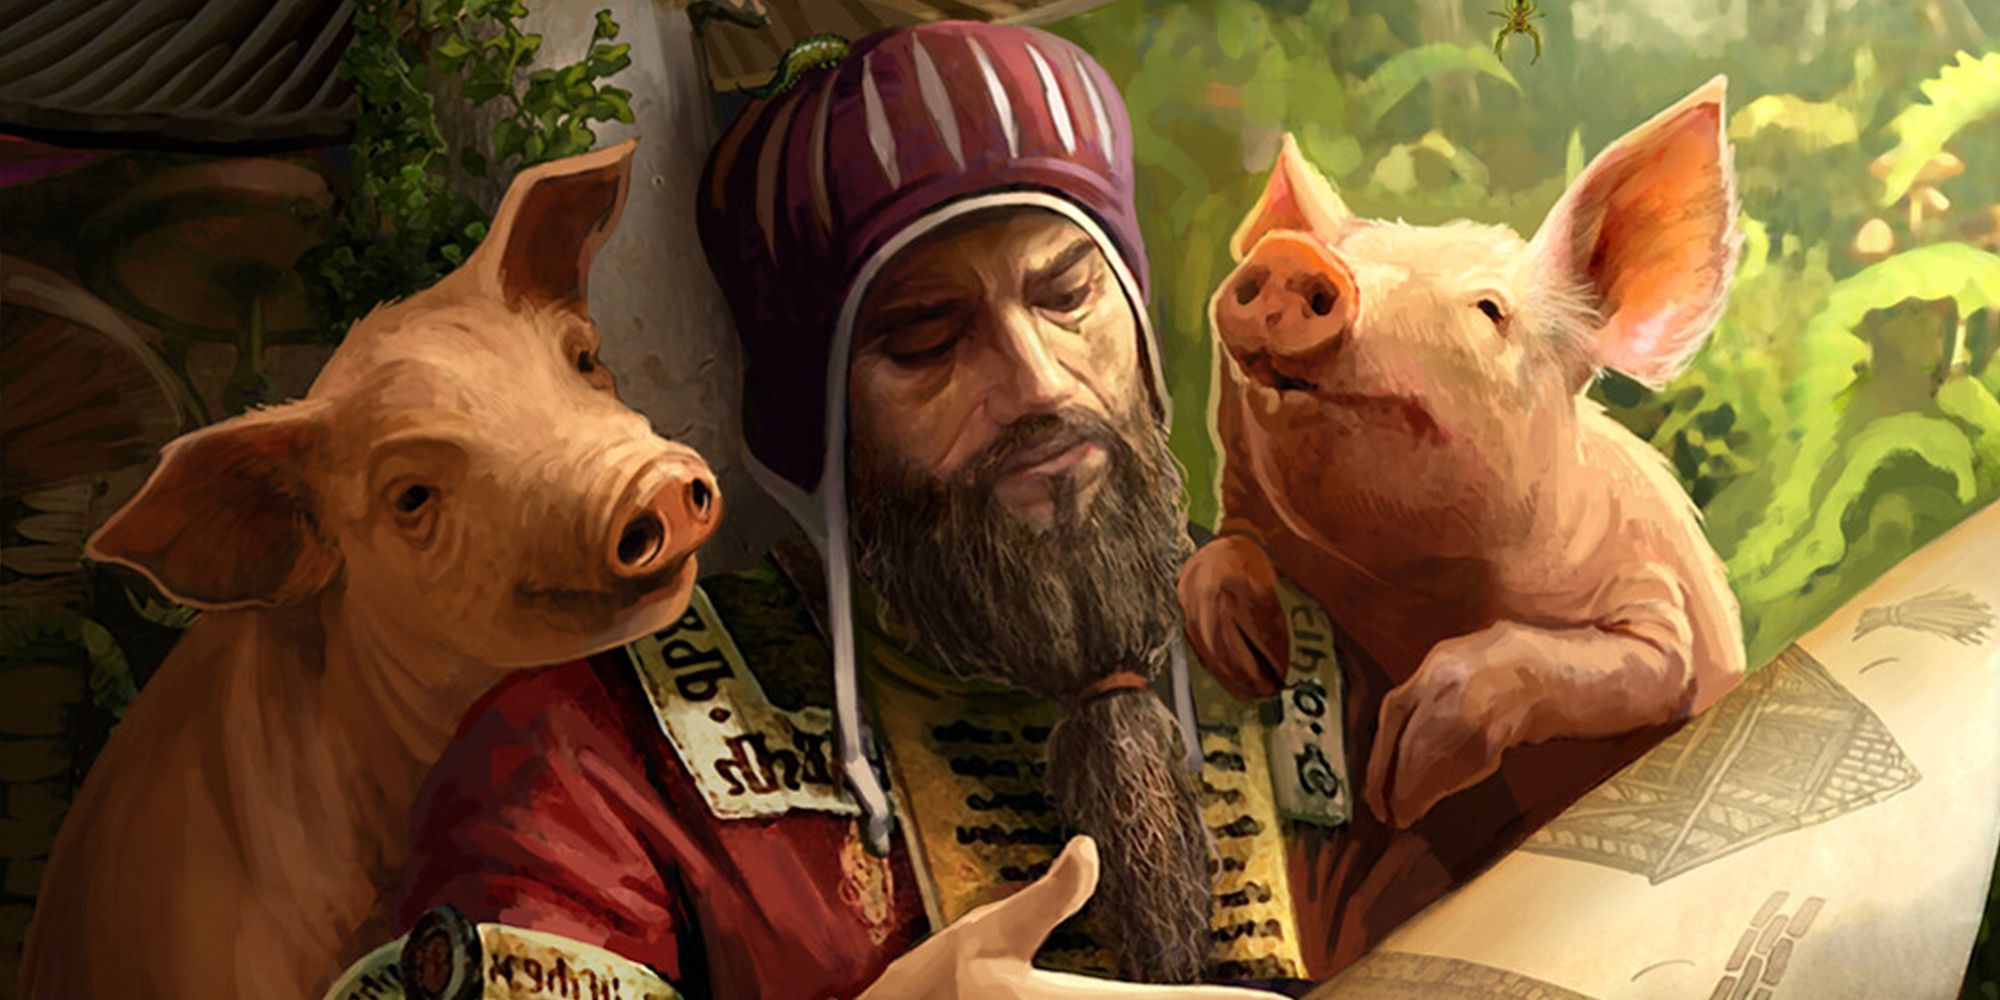 The Witcher -Gwent Card Art For Artorius Vigo Showing Him Going Over Plans With Some Magical Pigs